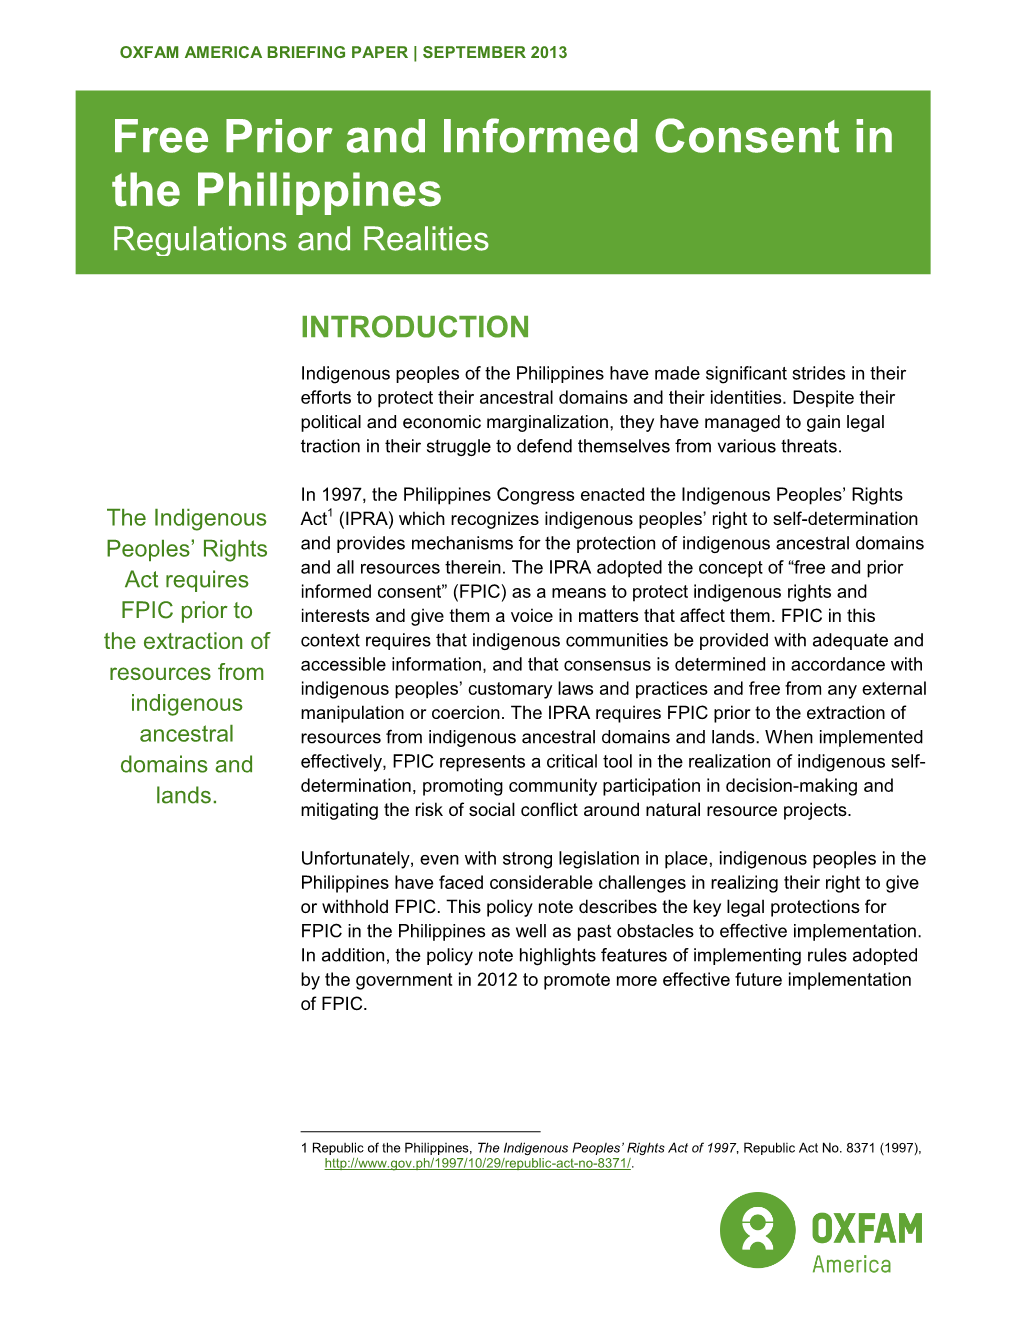 Free Prior and Informed Consent in the Philippines: Regulations